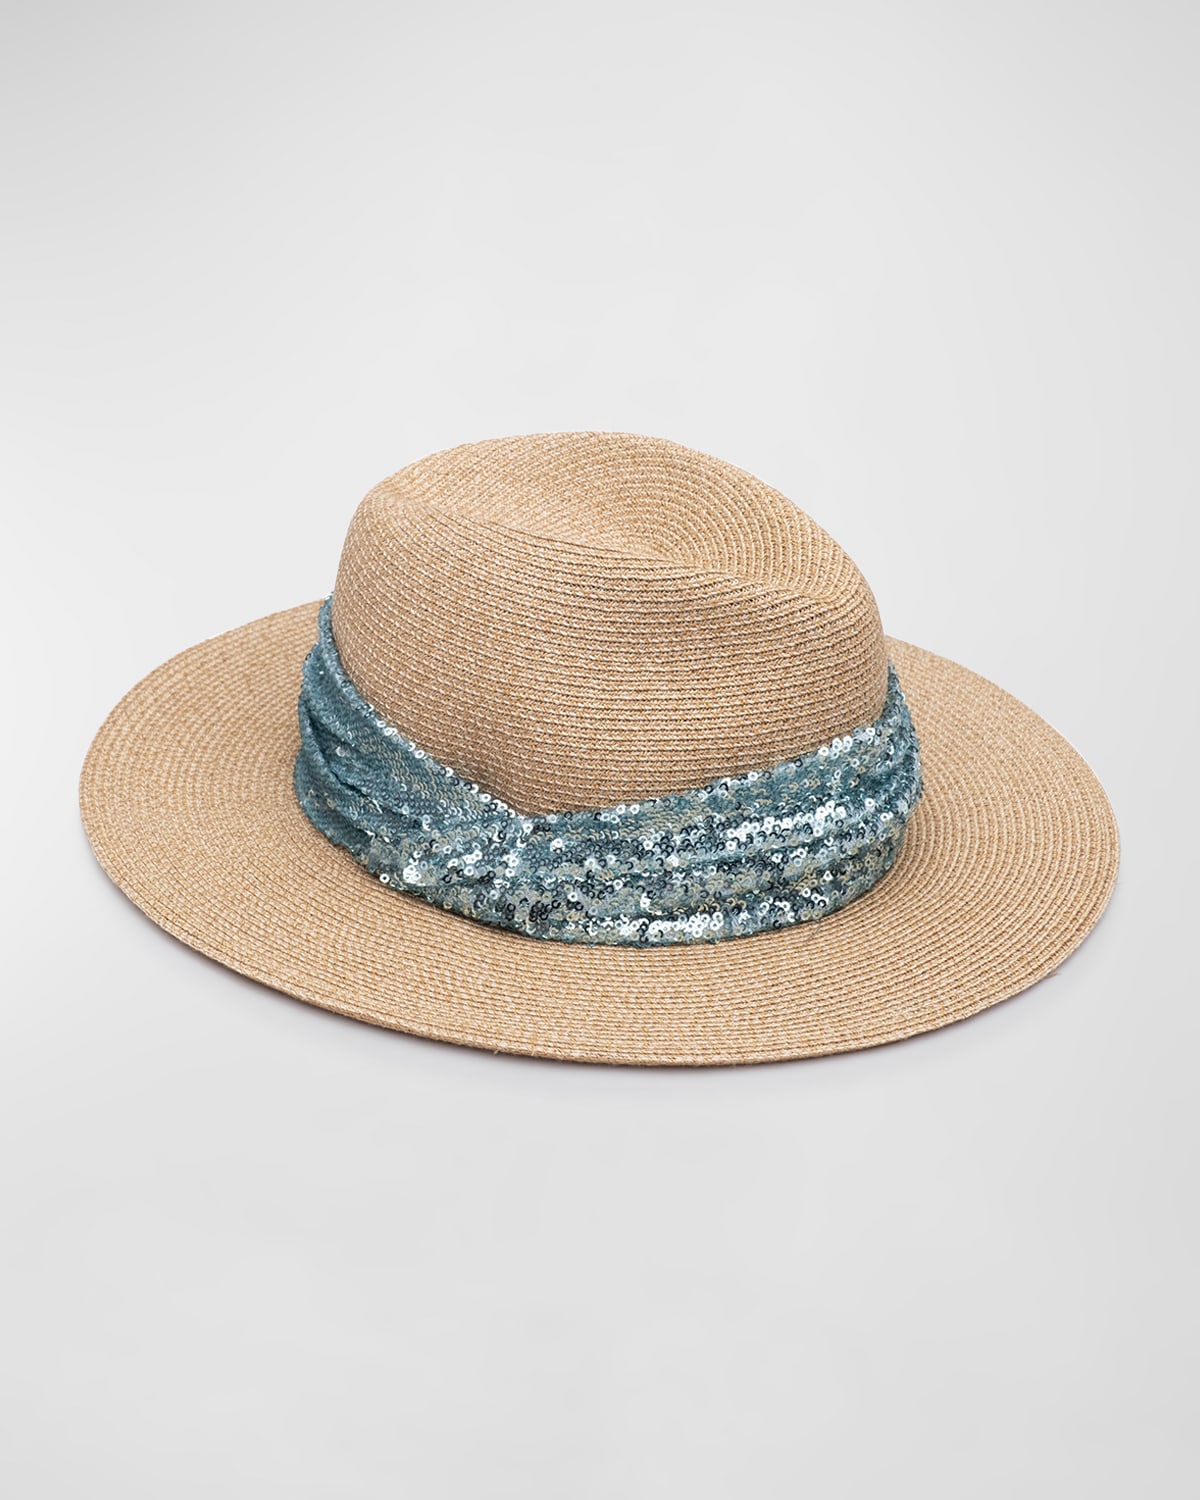 Eugenia Kim Courtney Packable Papercloth Fedora Hat With Sequins In Sand